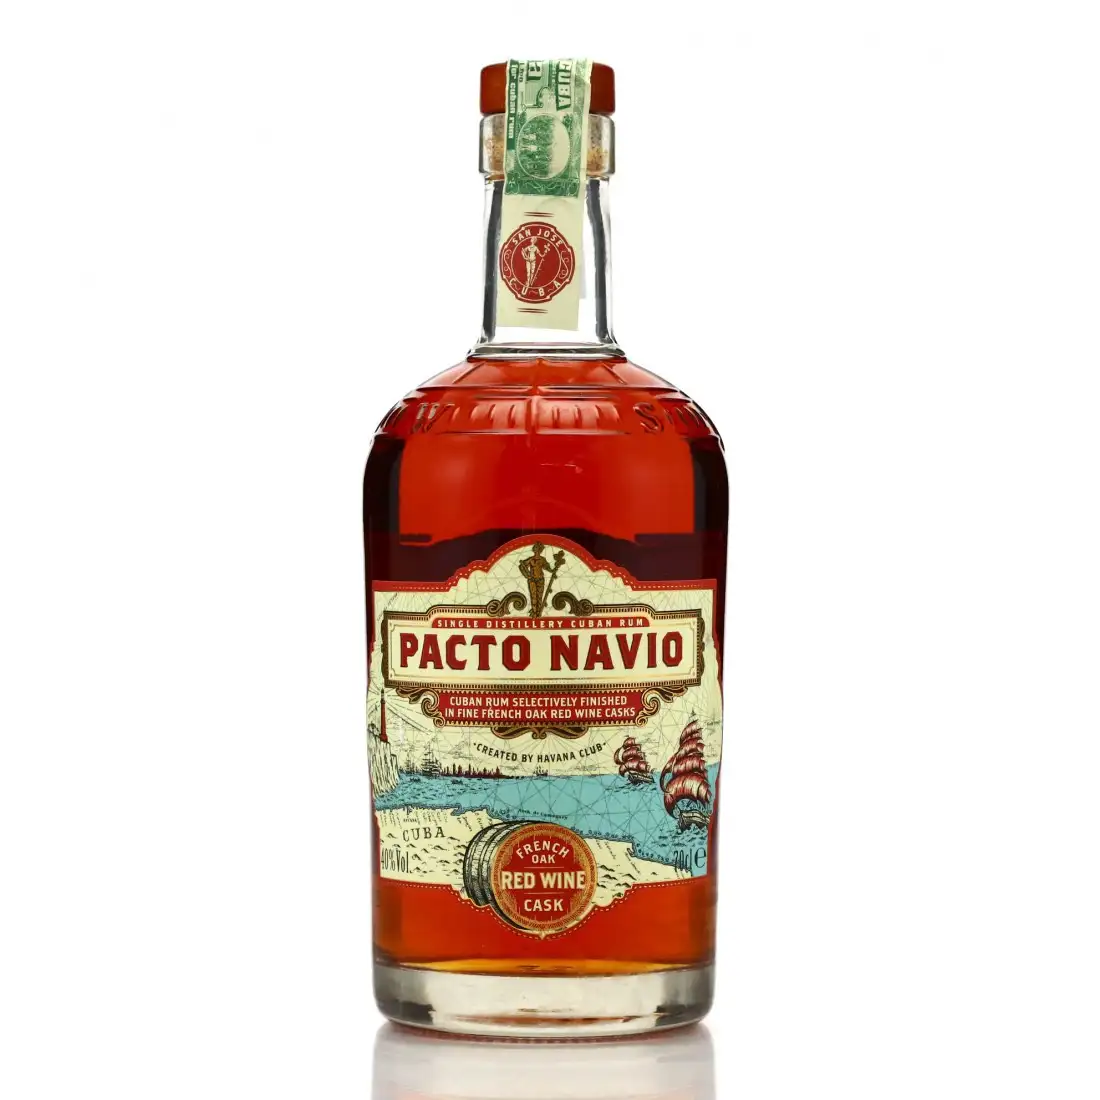 Image of the front of the bottle of the rum Pacto Navio Red Wine Cask